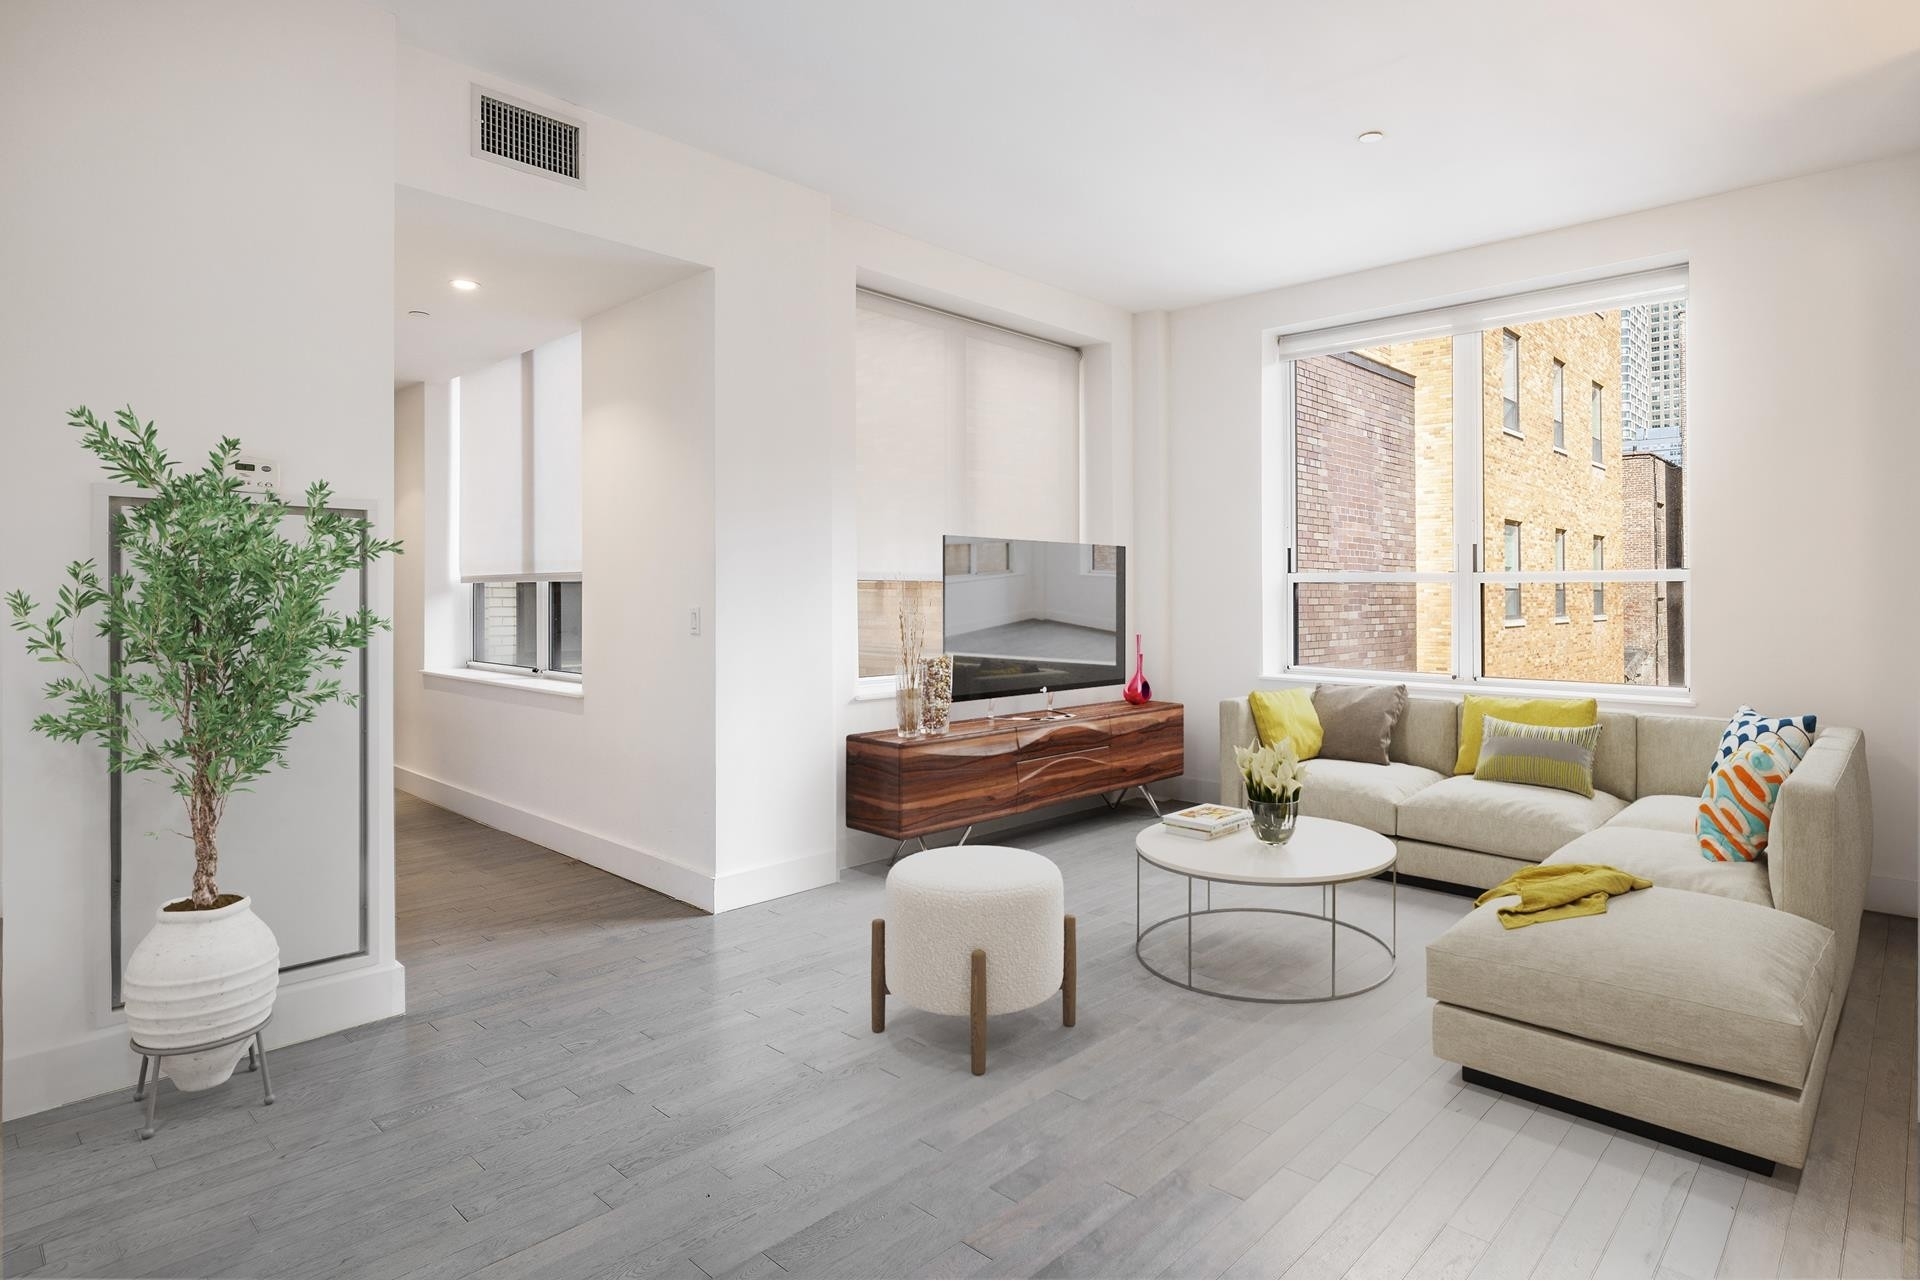 Condominium for Sale at Nine52, 416 W 52ND ST, 406 Hell's Kitchen, New York, New York 10019